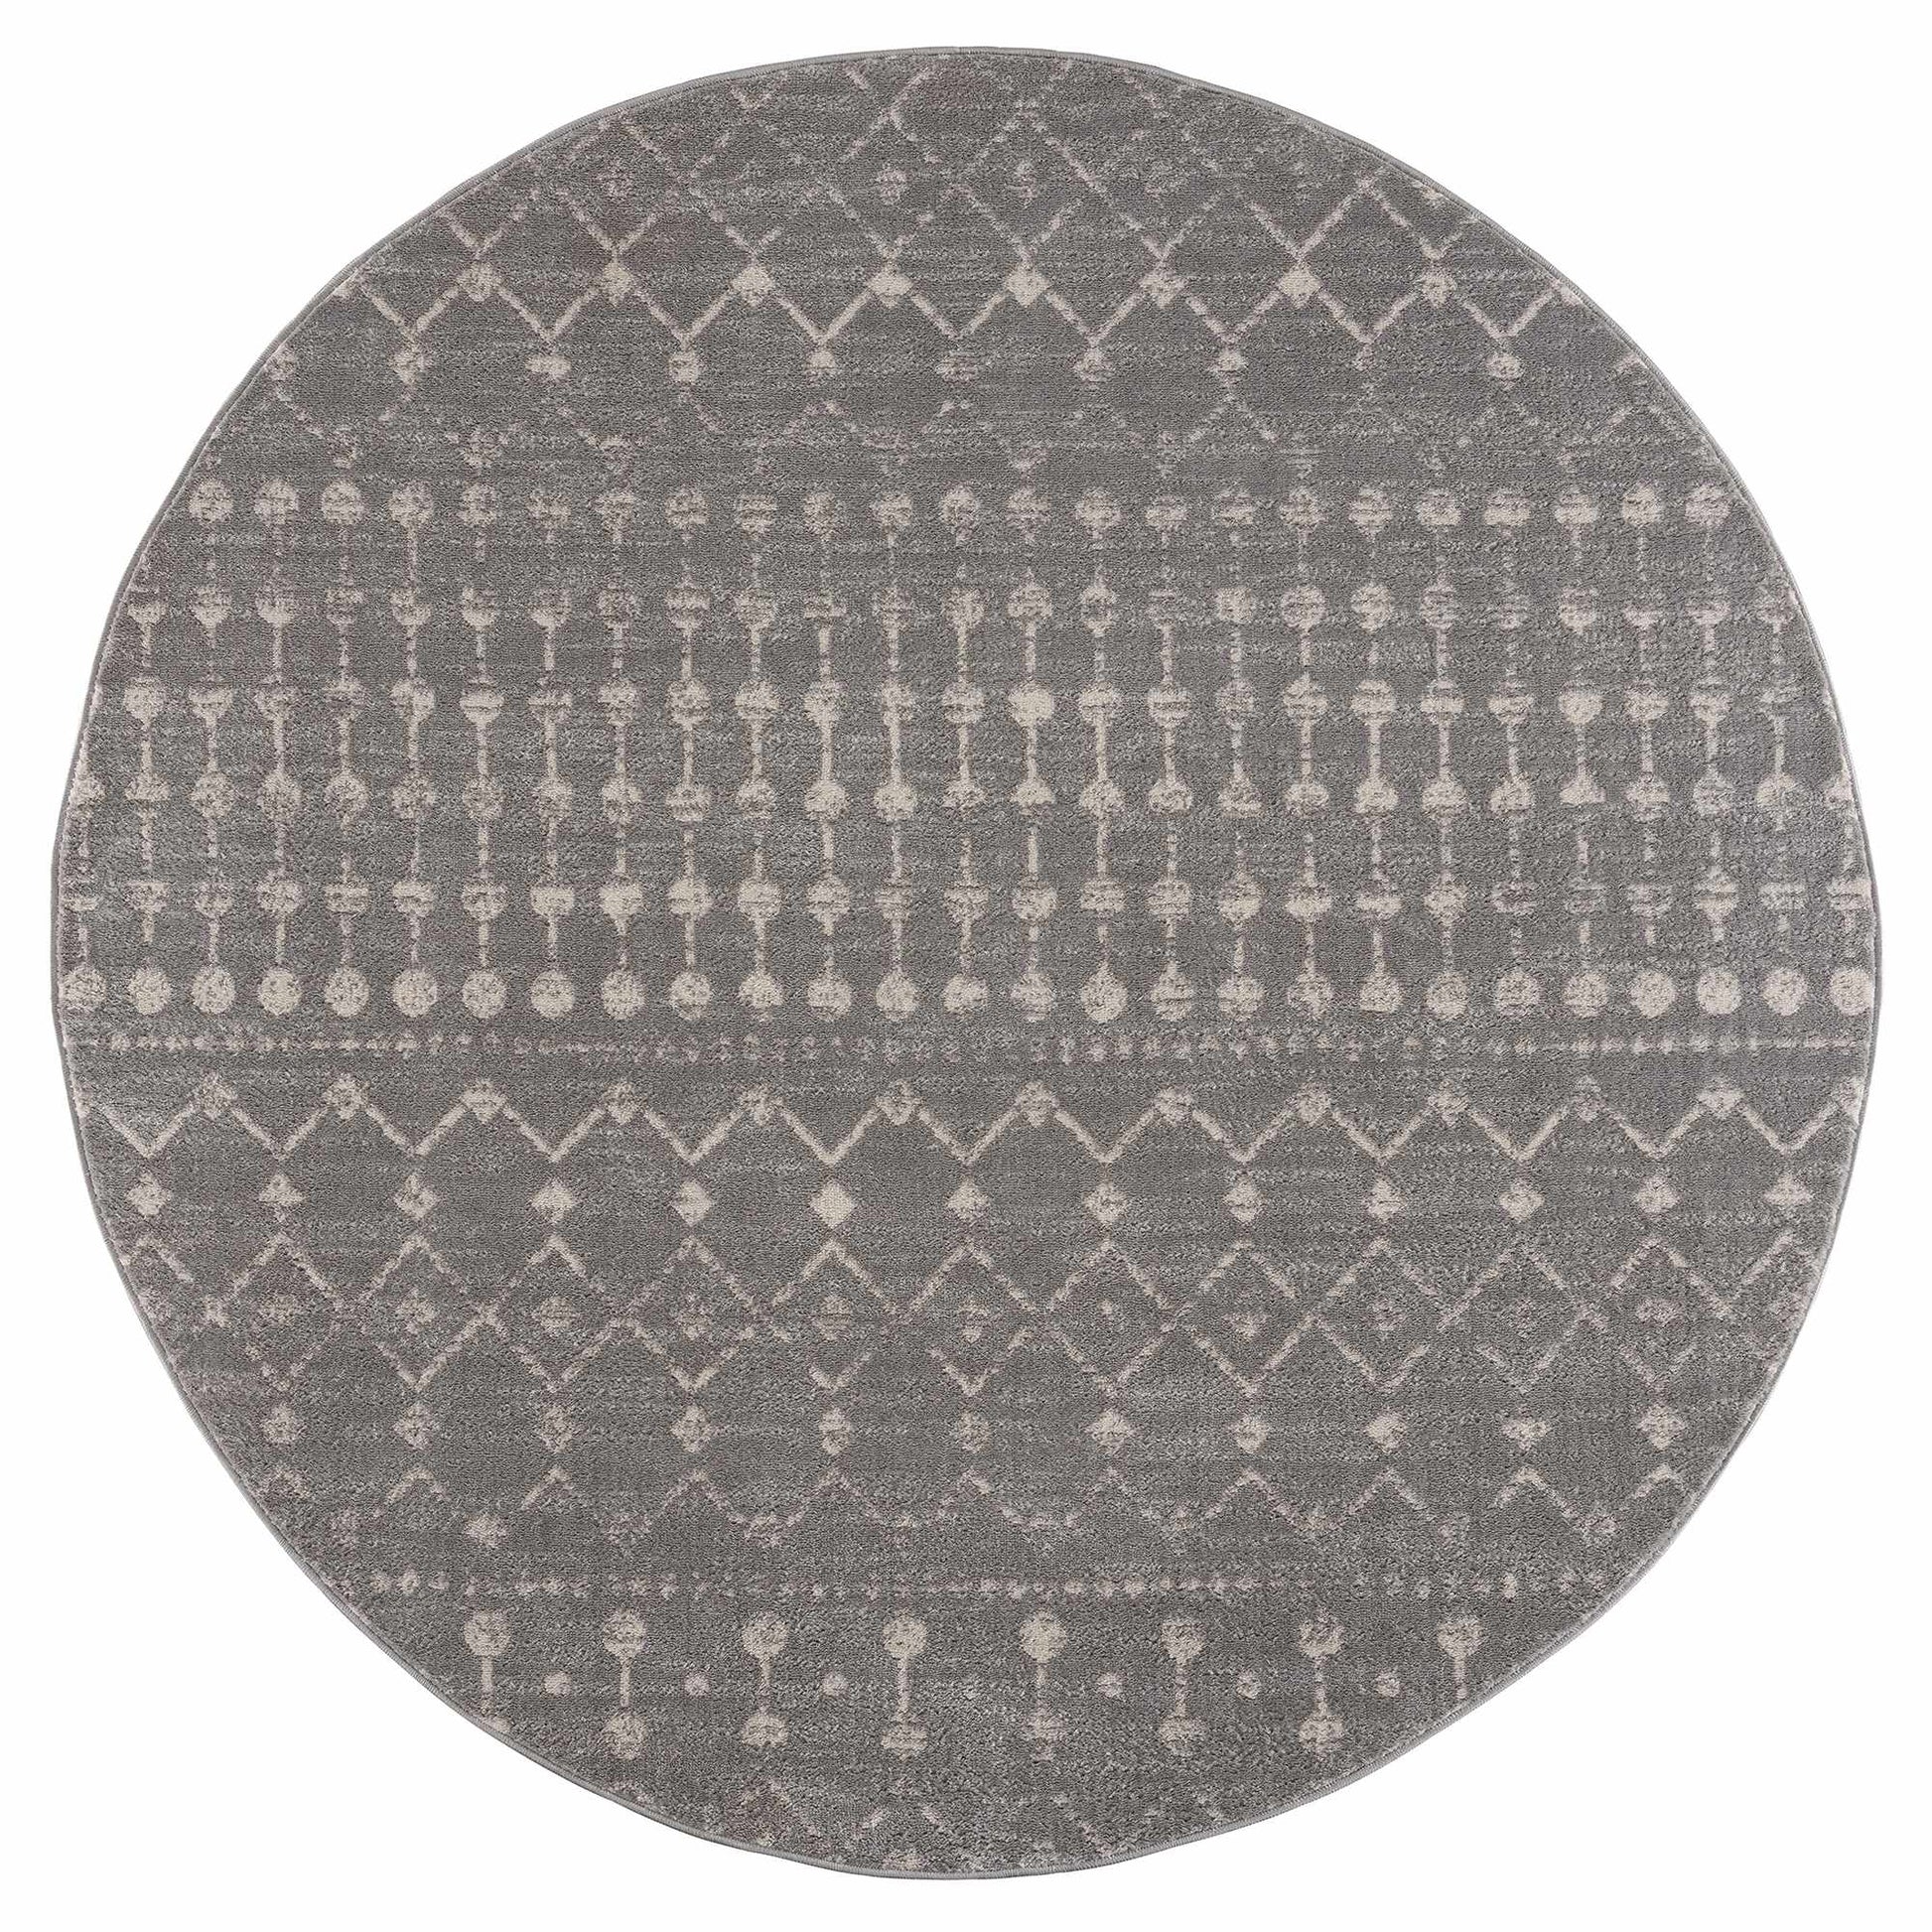 Boutique Rugs Rugs 7'10" Round Tigrican Light Gray 2334 Area Rug